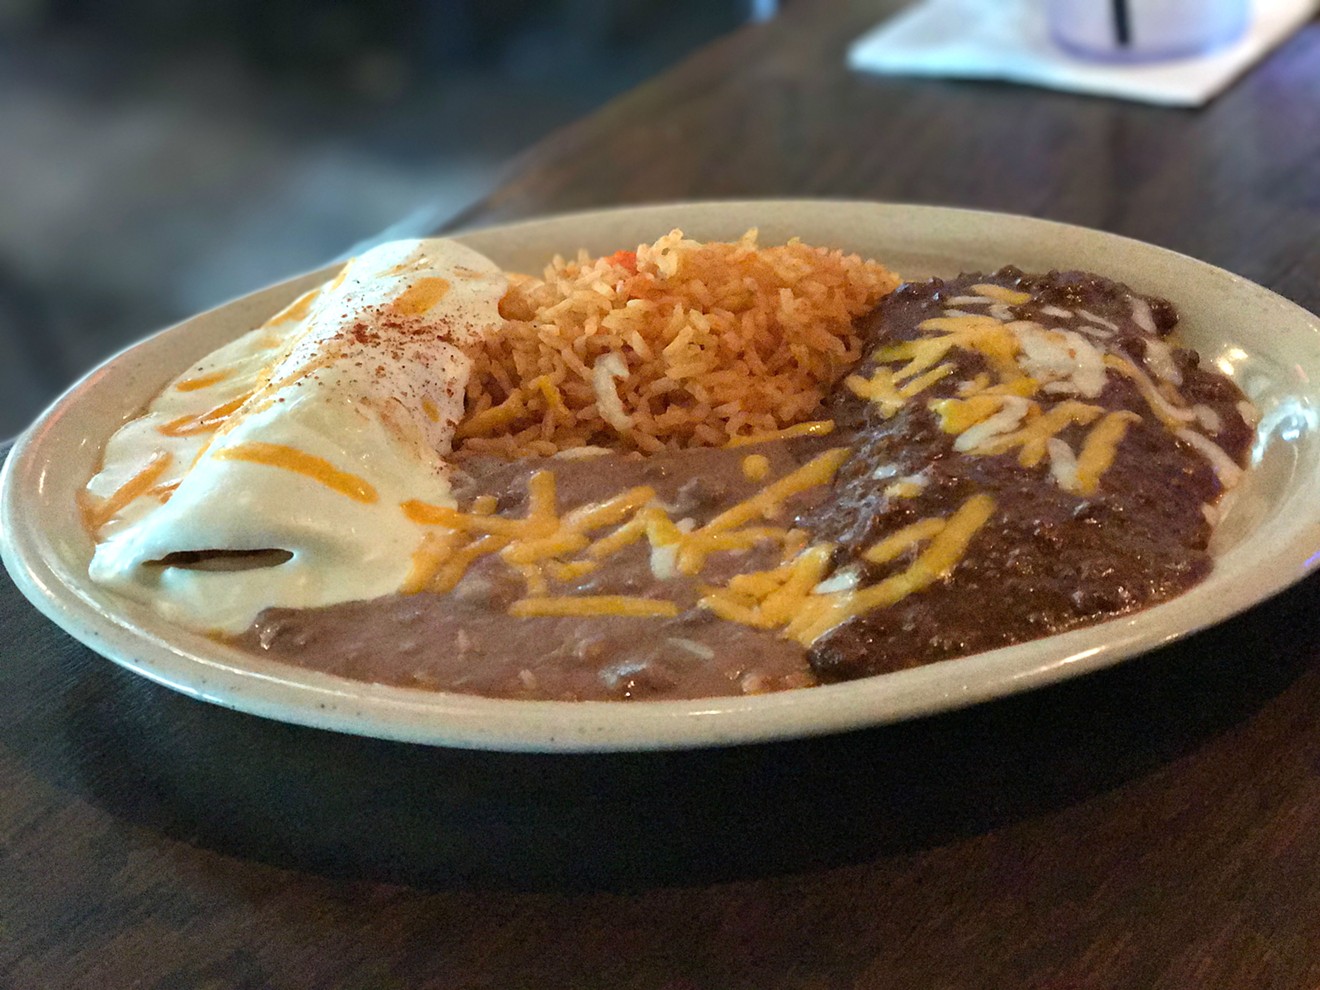 The enchiladas at E Bar are delicious without weighing you down, which is no small feat in the world of Tex-Mex.